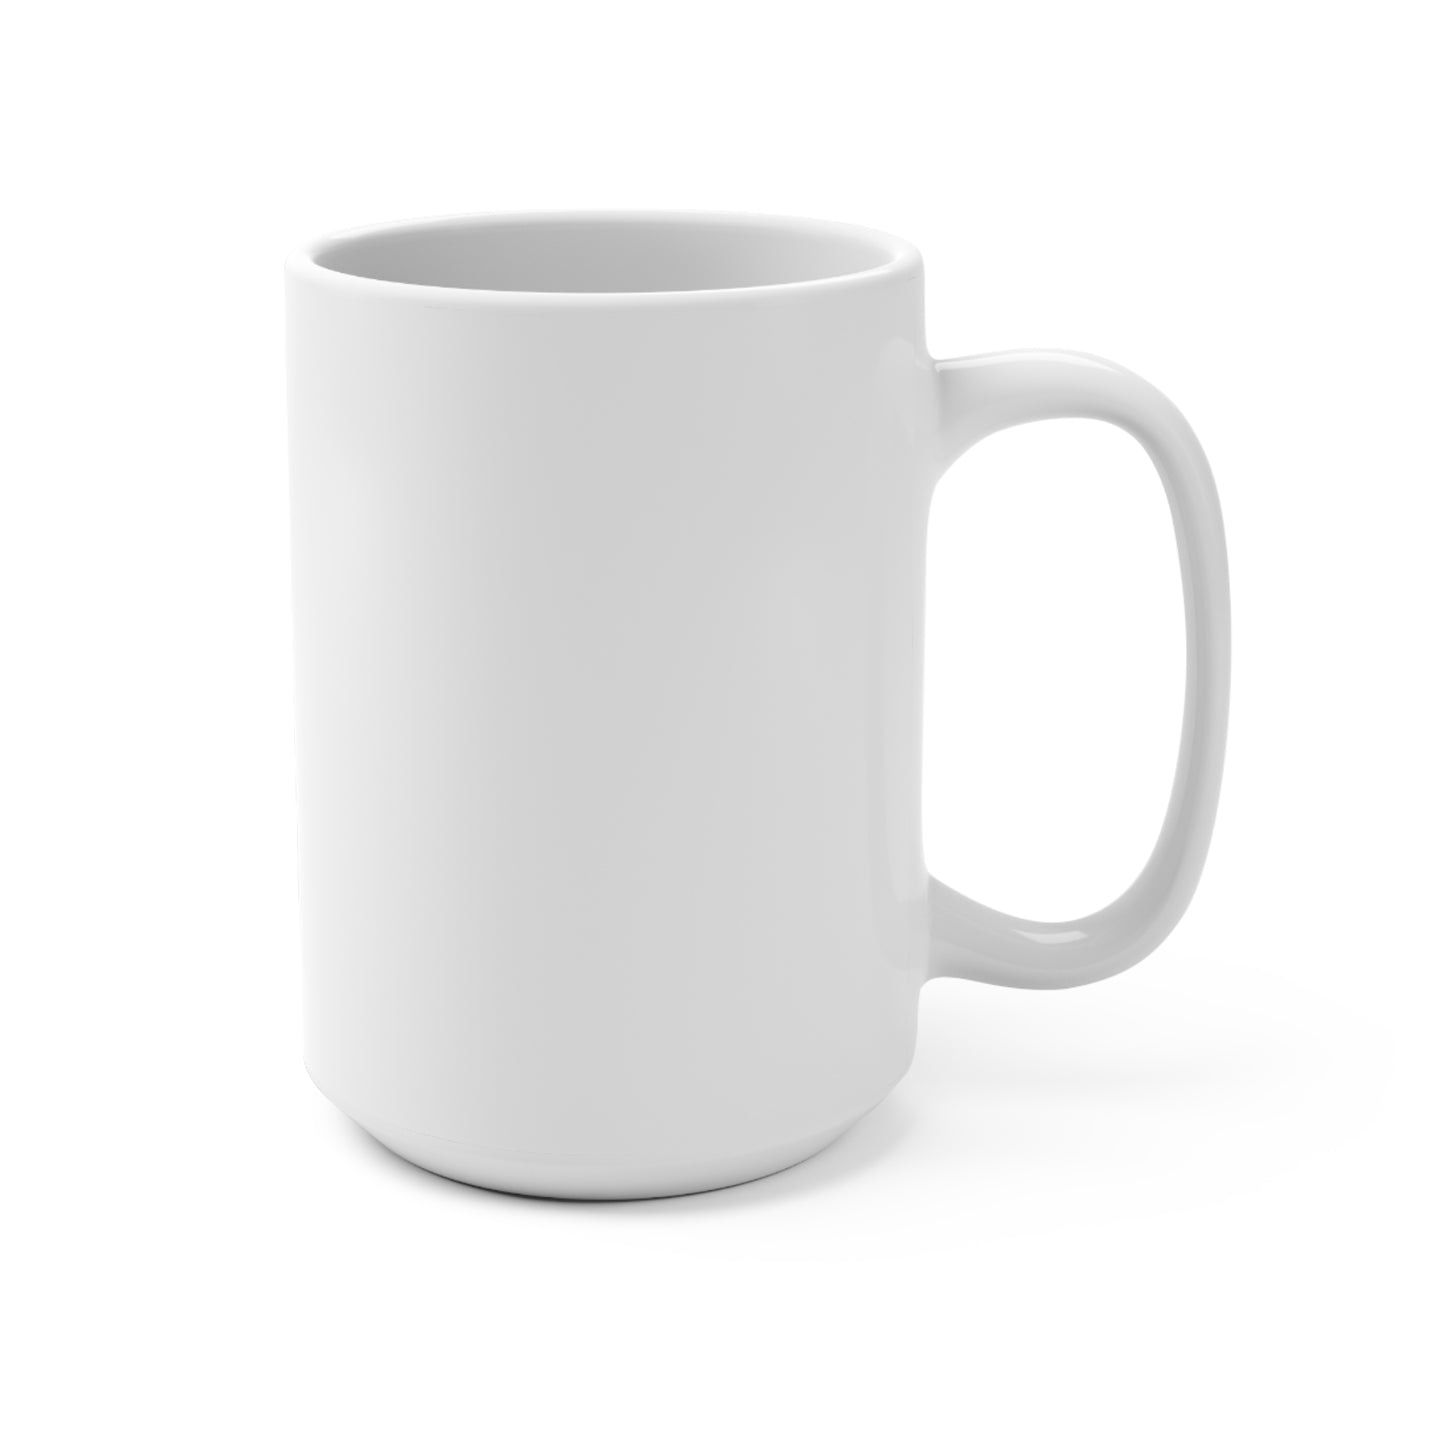 Bold and Uncompromising Statement Mug 15oz: Living Wage Now!